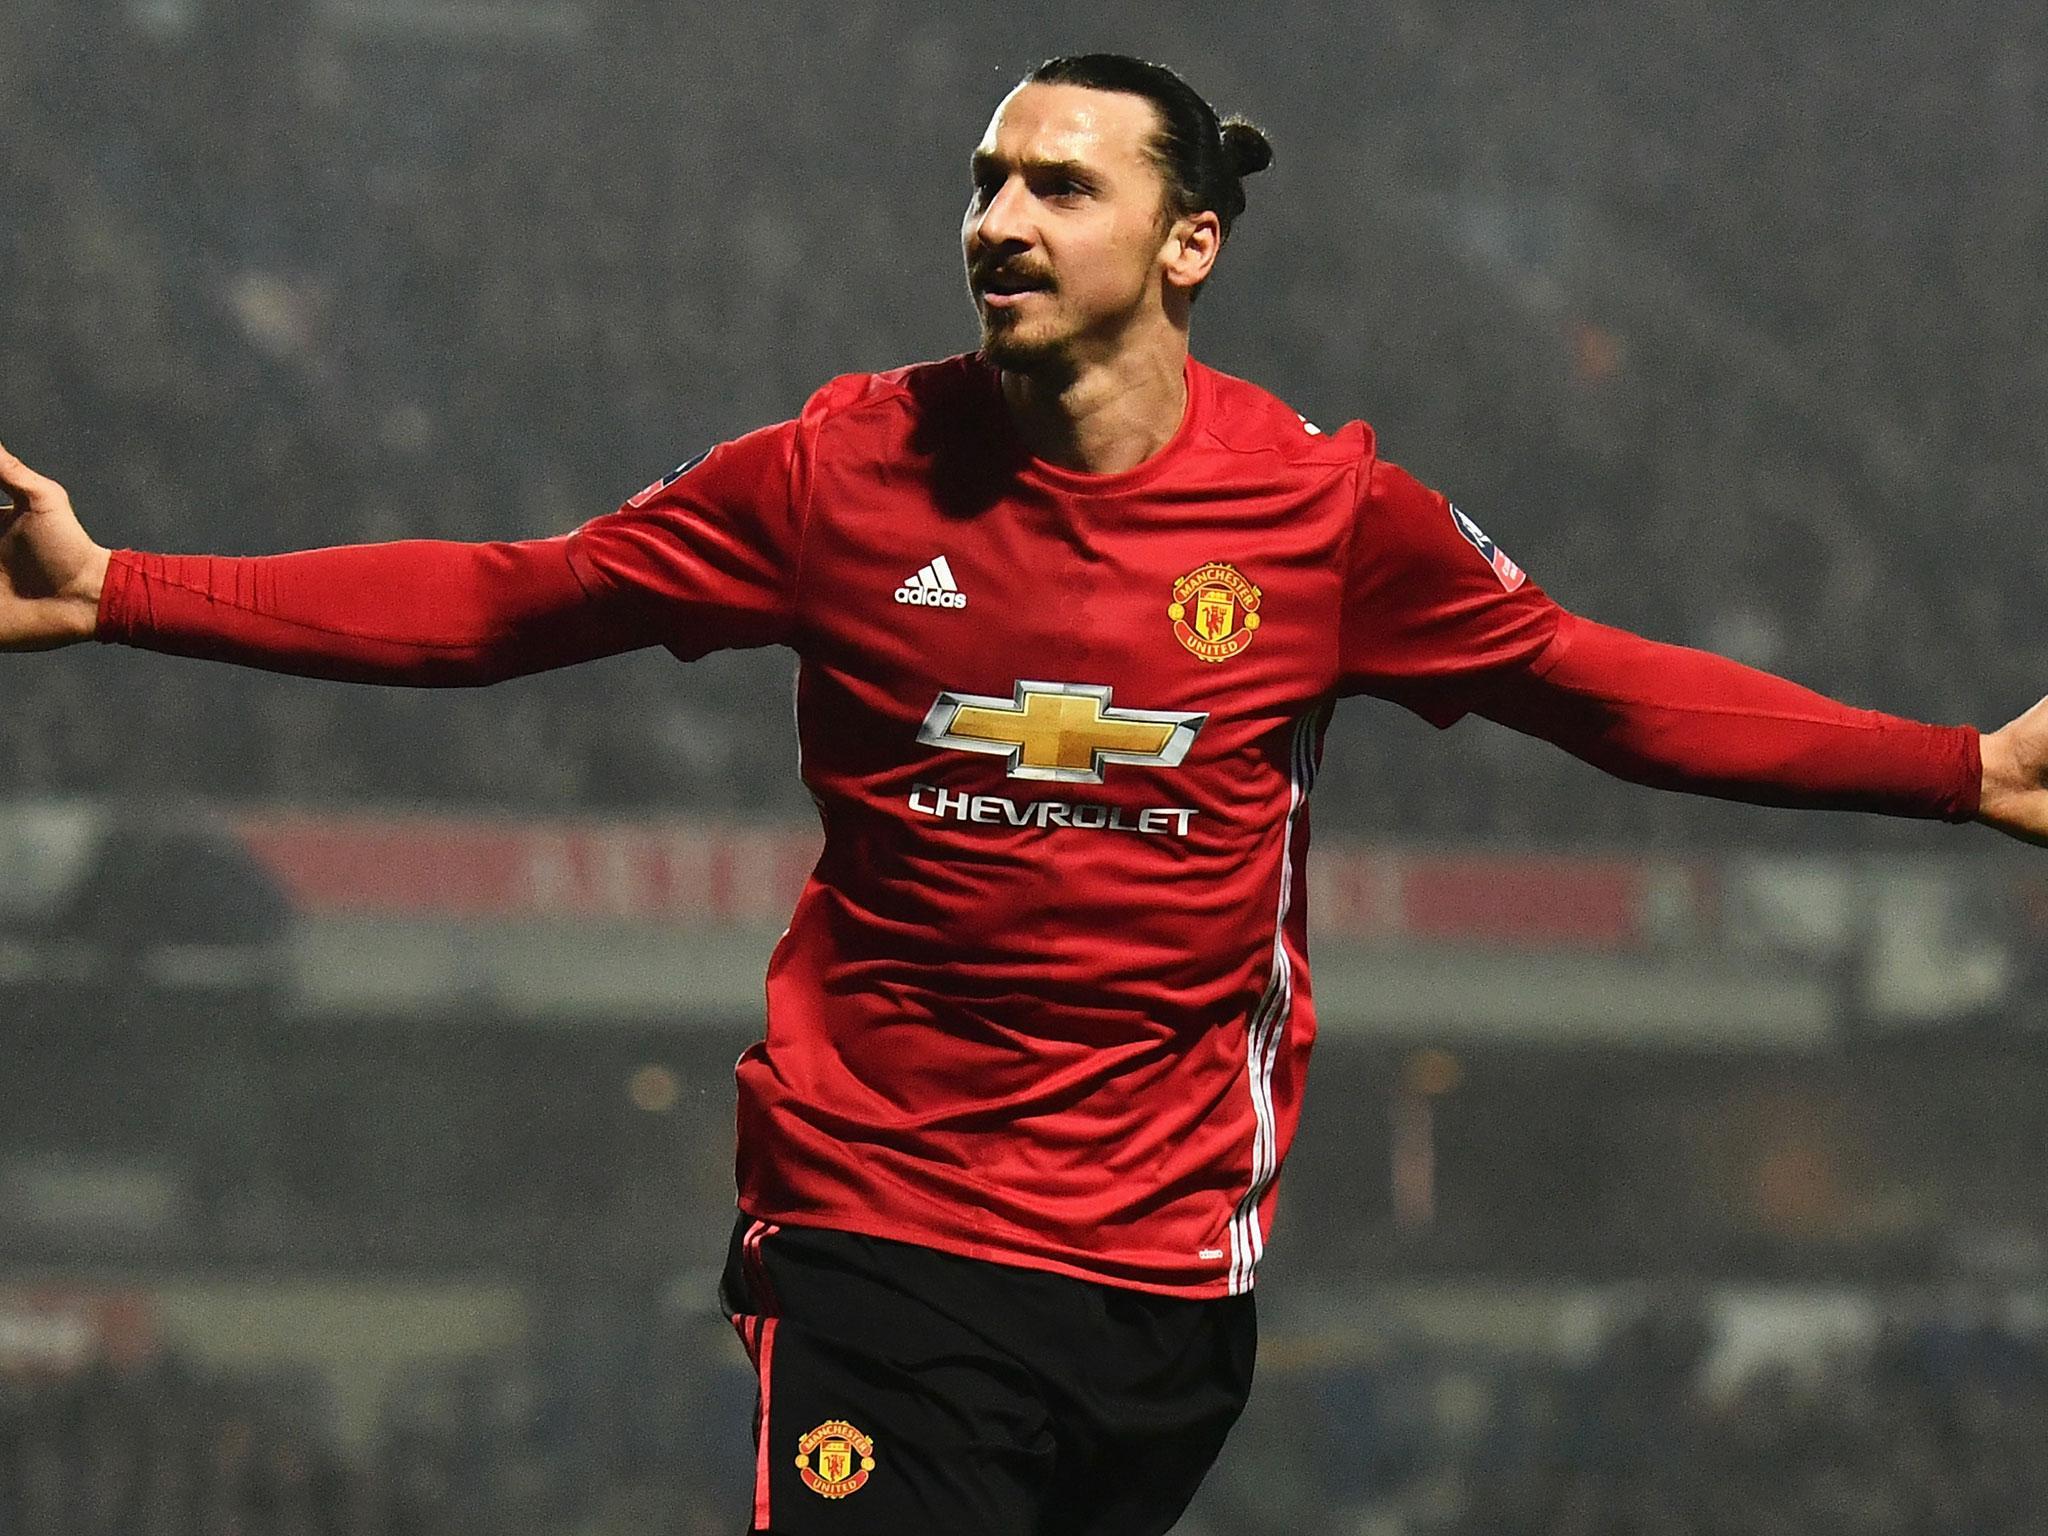 Jose Mourinho sees Zlatan Ibrahimovic as a key member of the Manchester United dressing room